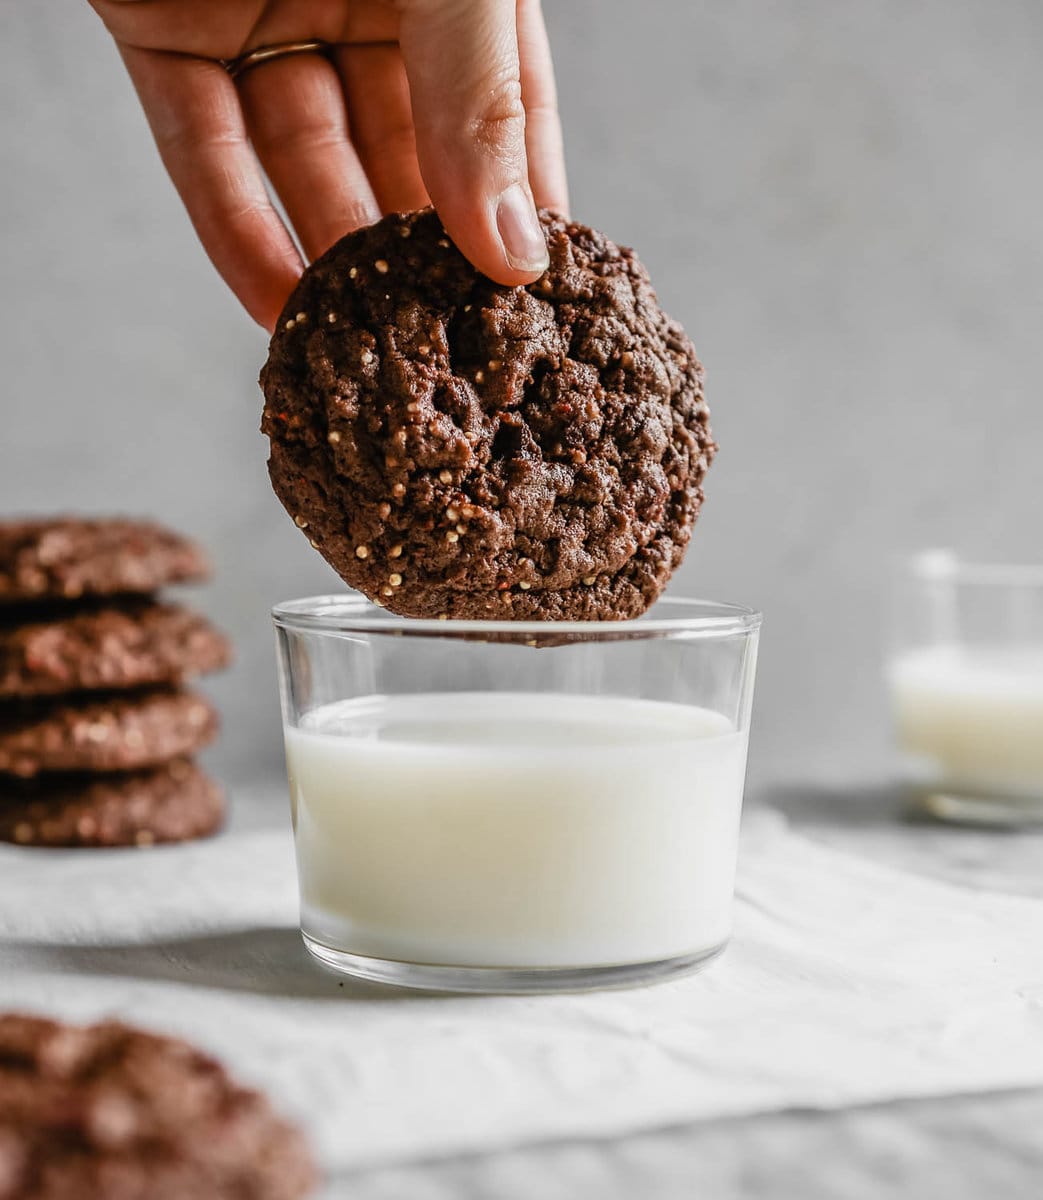 a hand dipping a chocolate cookie in milk